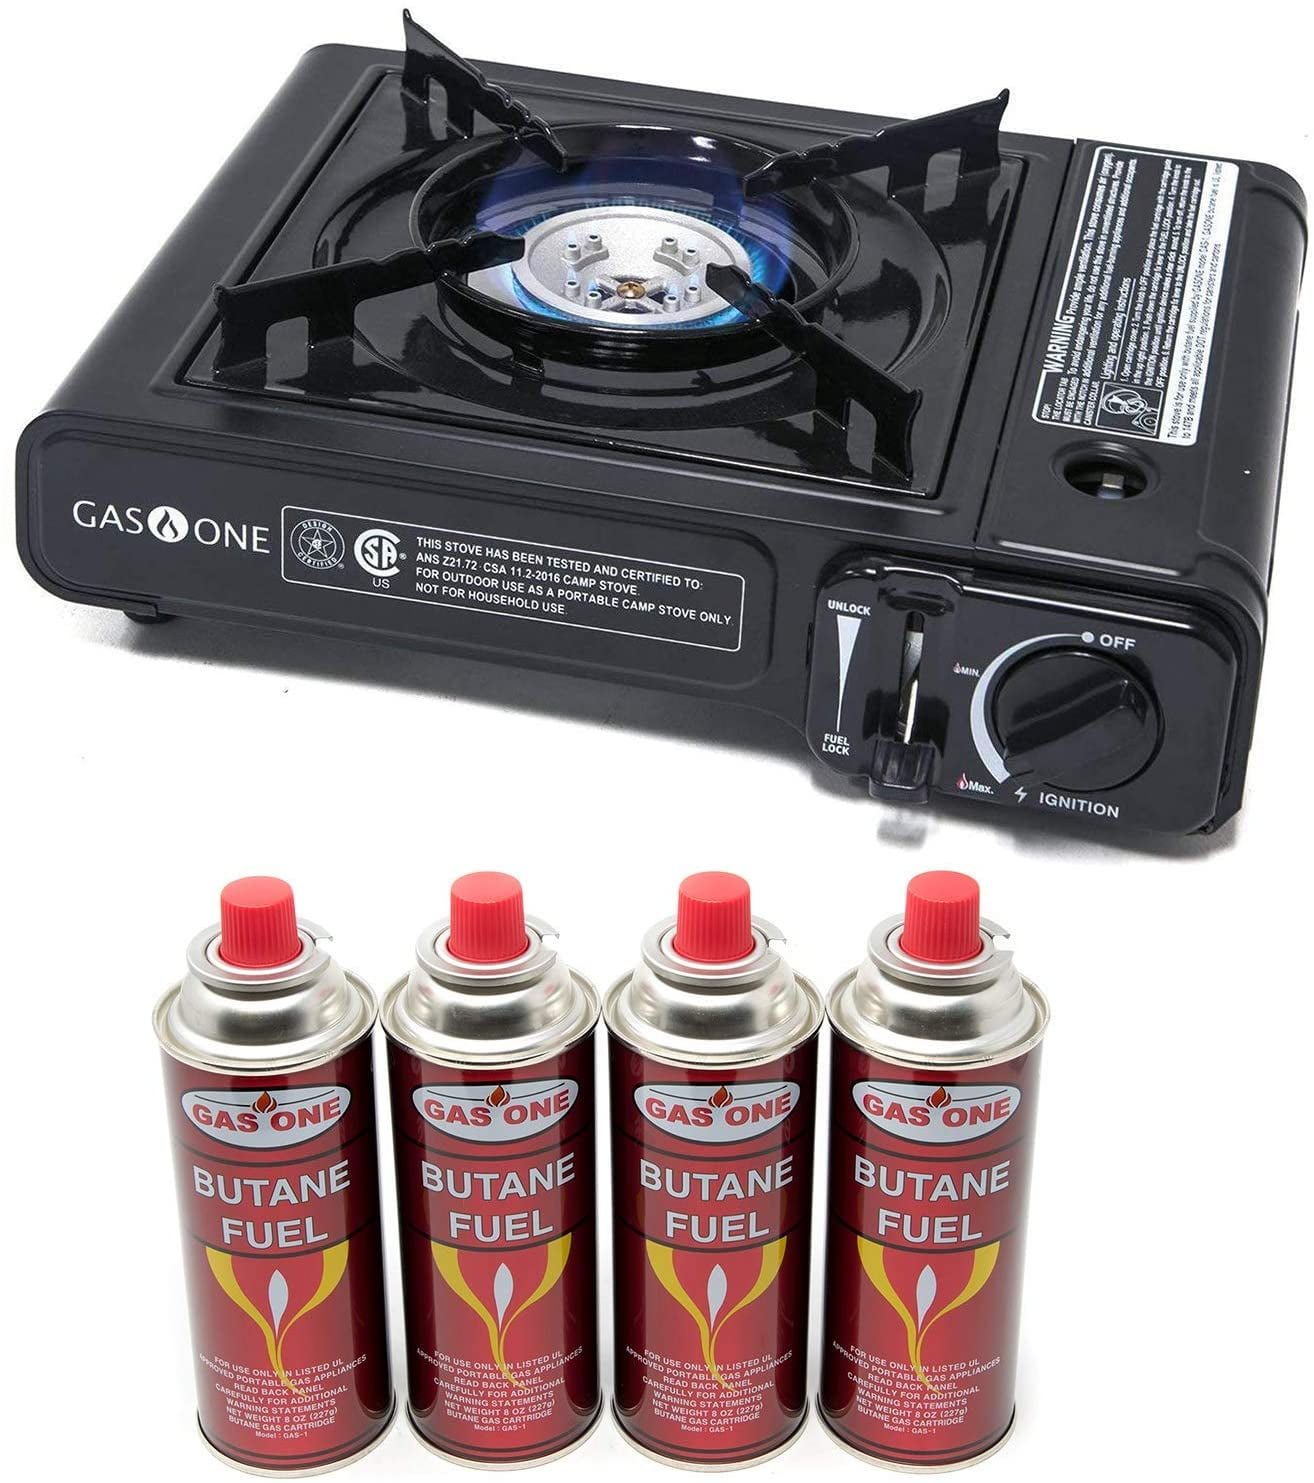 Gas ONE GS-1000 7,650 BTU Portable Butane Gas Stove Automatic Ignition with  Carrying Case, CSA Listed